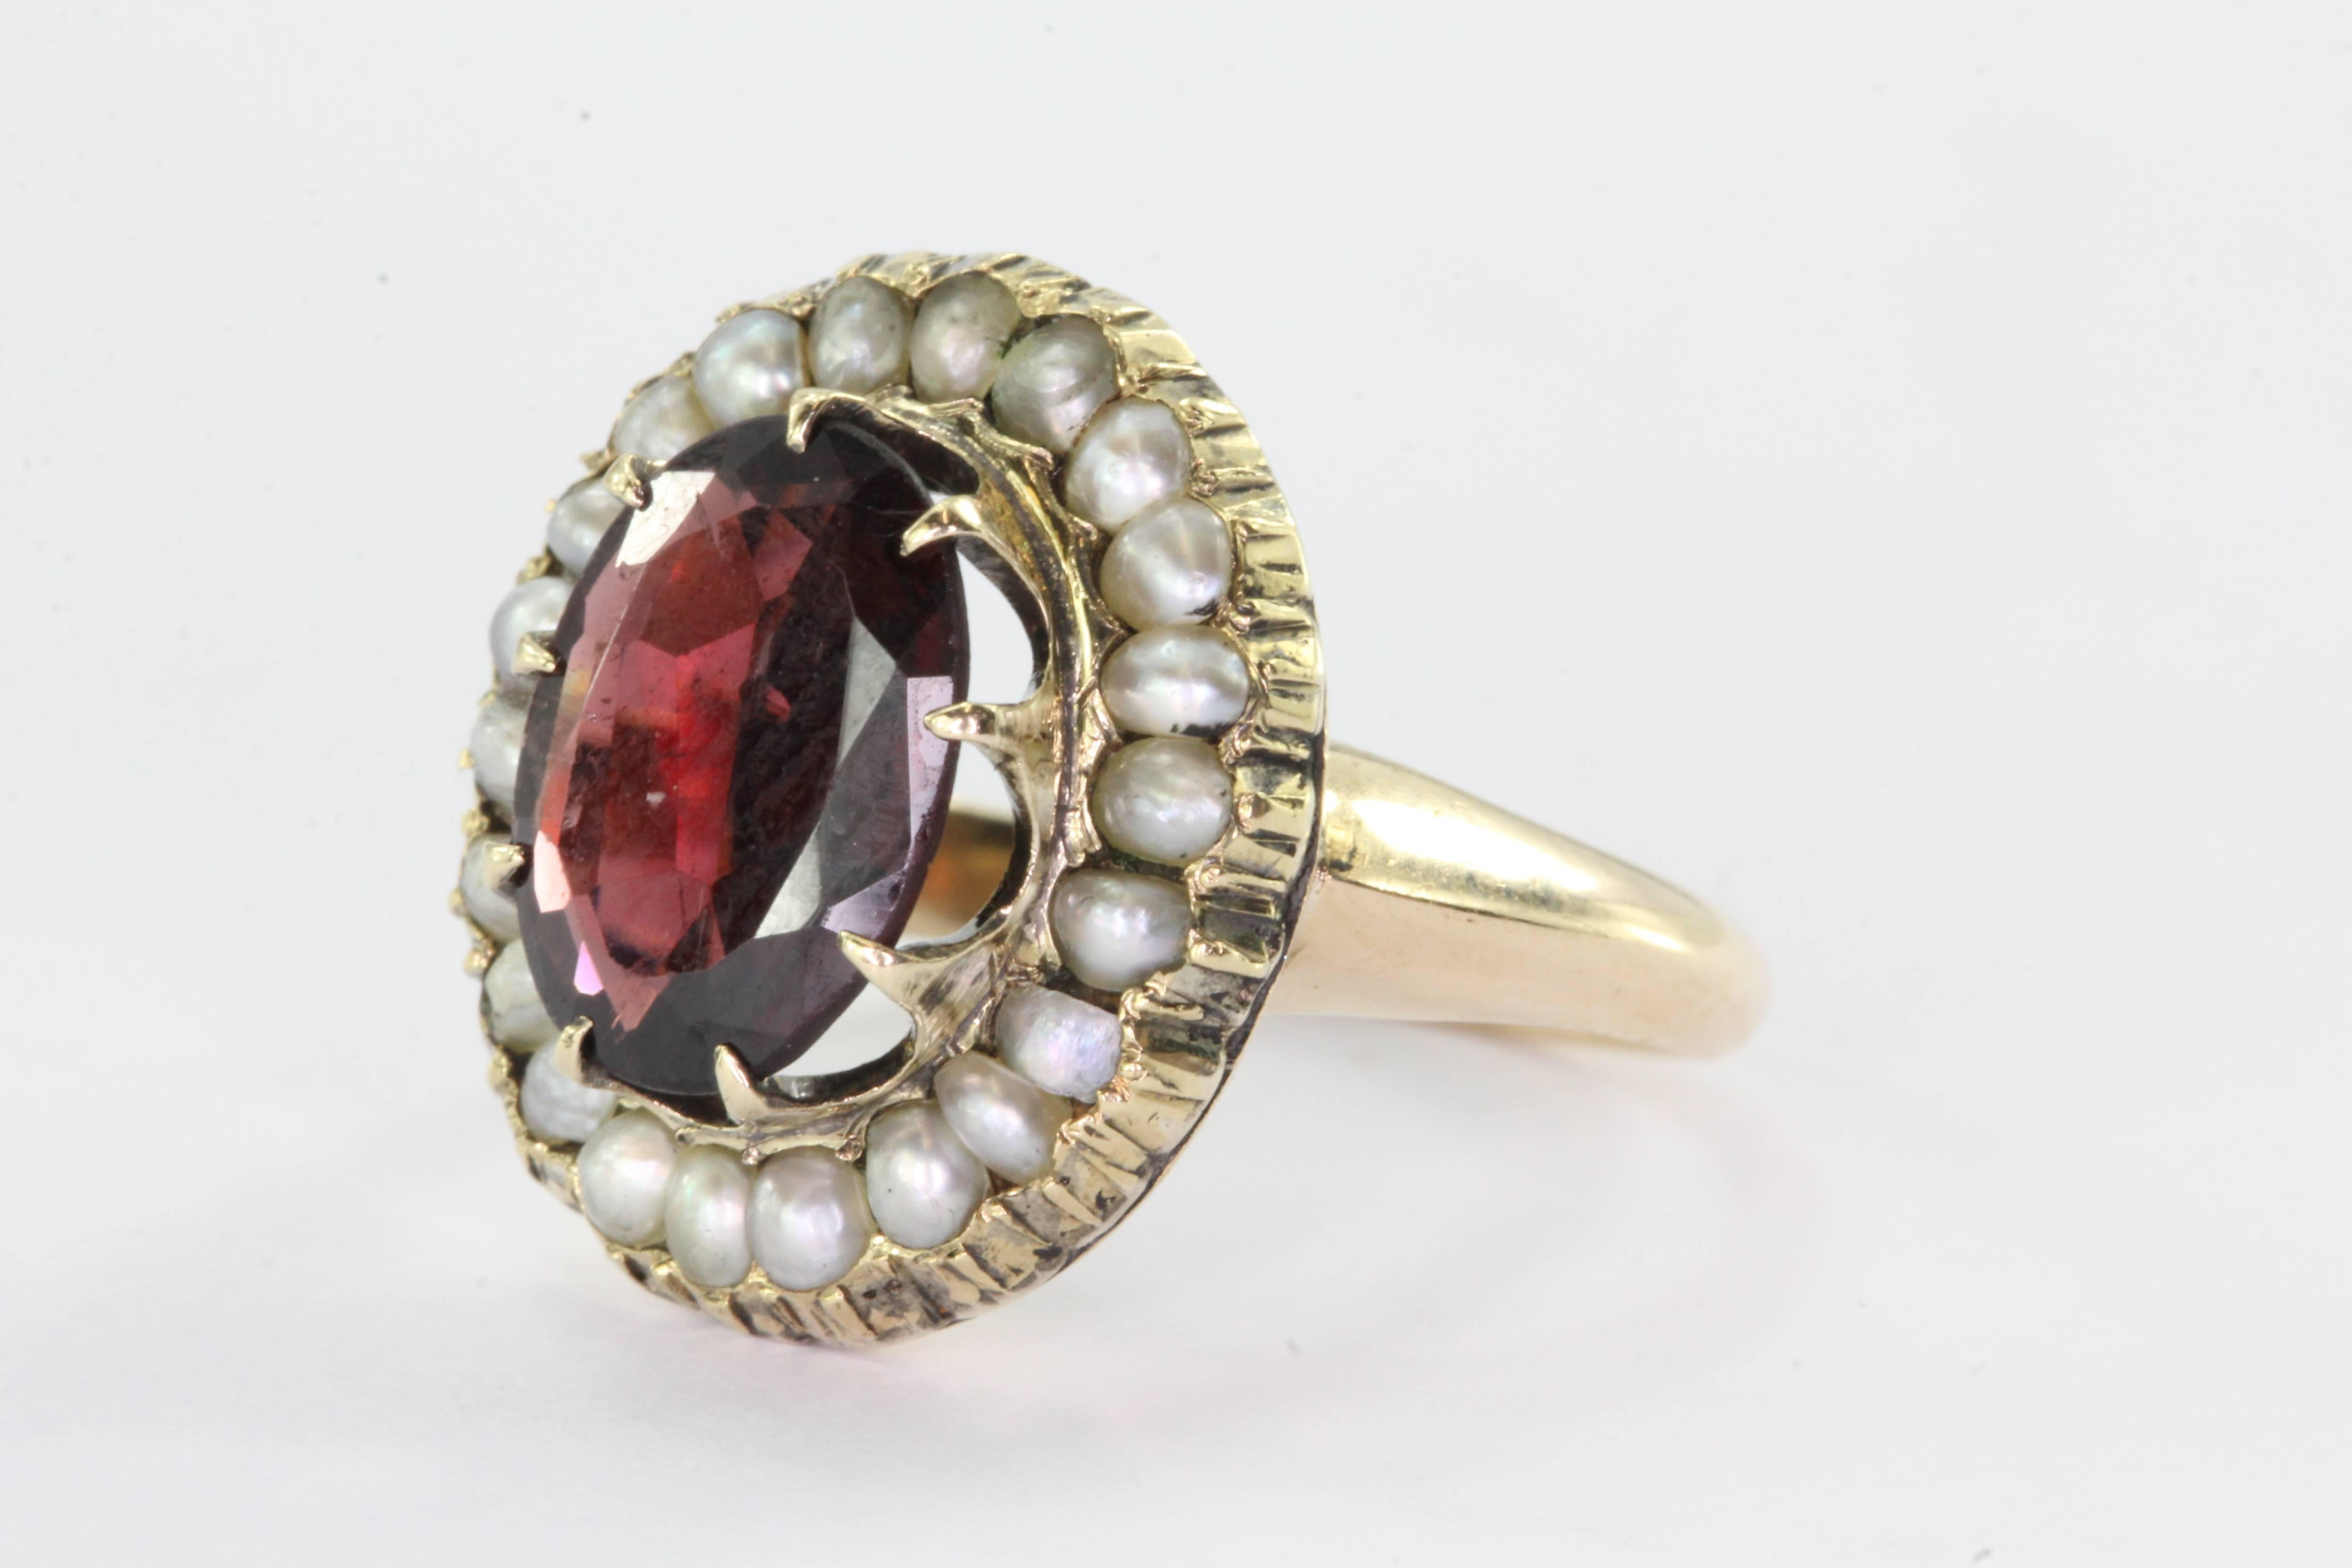 Victorian 14K Gold Garnet Seed Pearl Halo Ring. The ring is in excellent estate condition and ready to wear. The garnet measures 9.9mm x 7.1mm x 2.6mm. The ring is a size 3 and weighs a total of 4.5 grams.